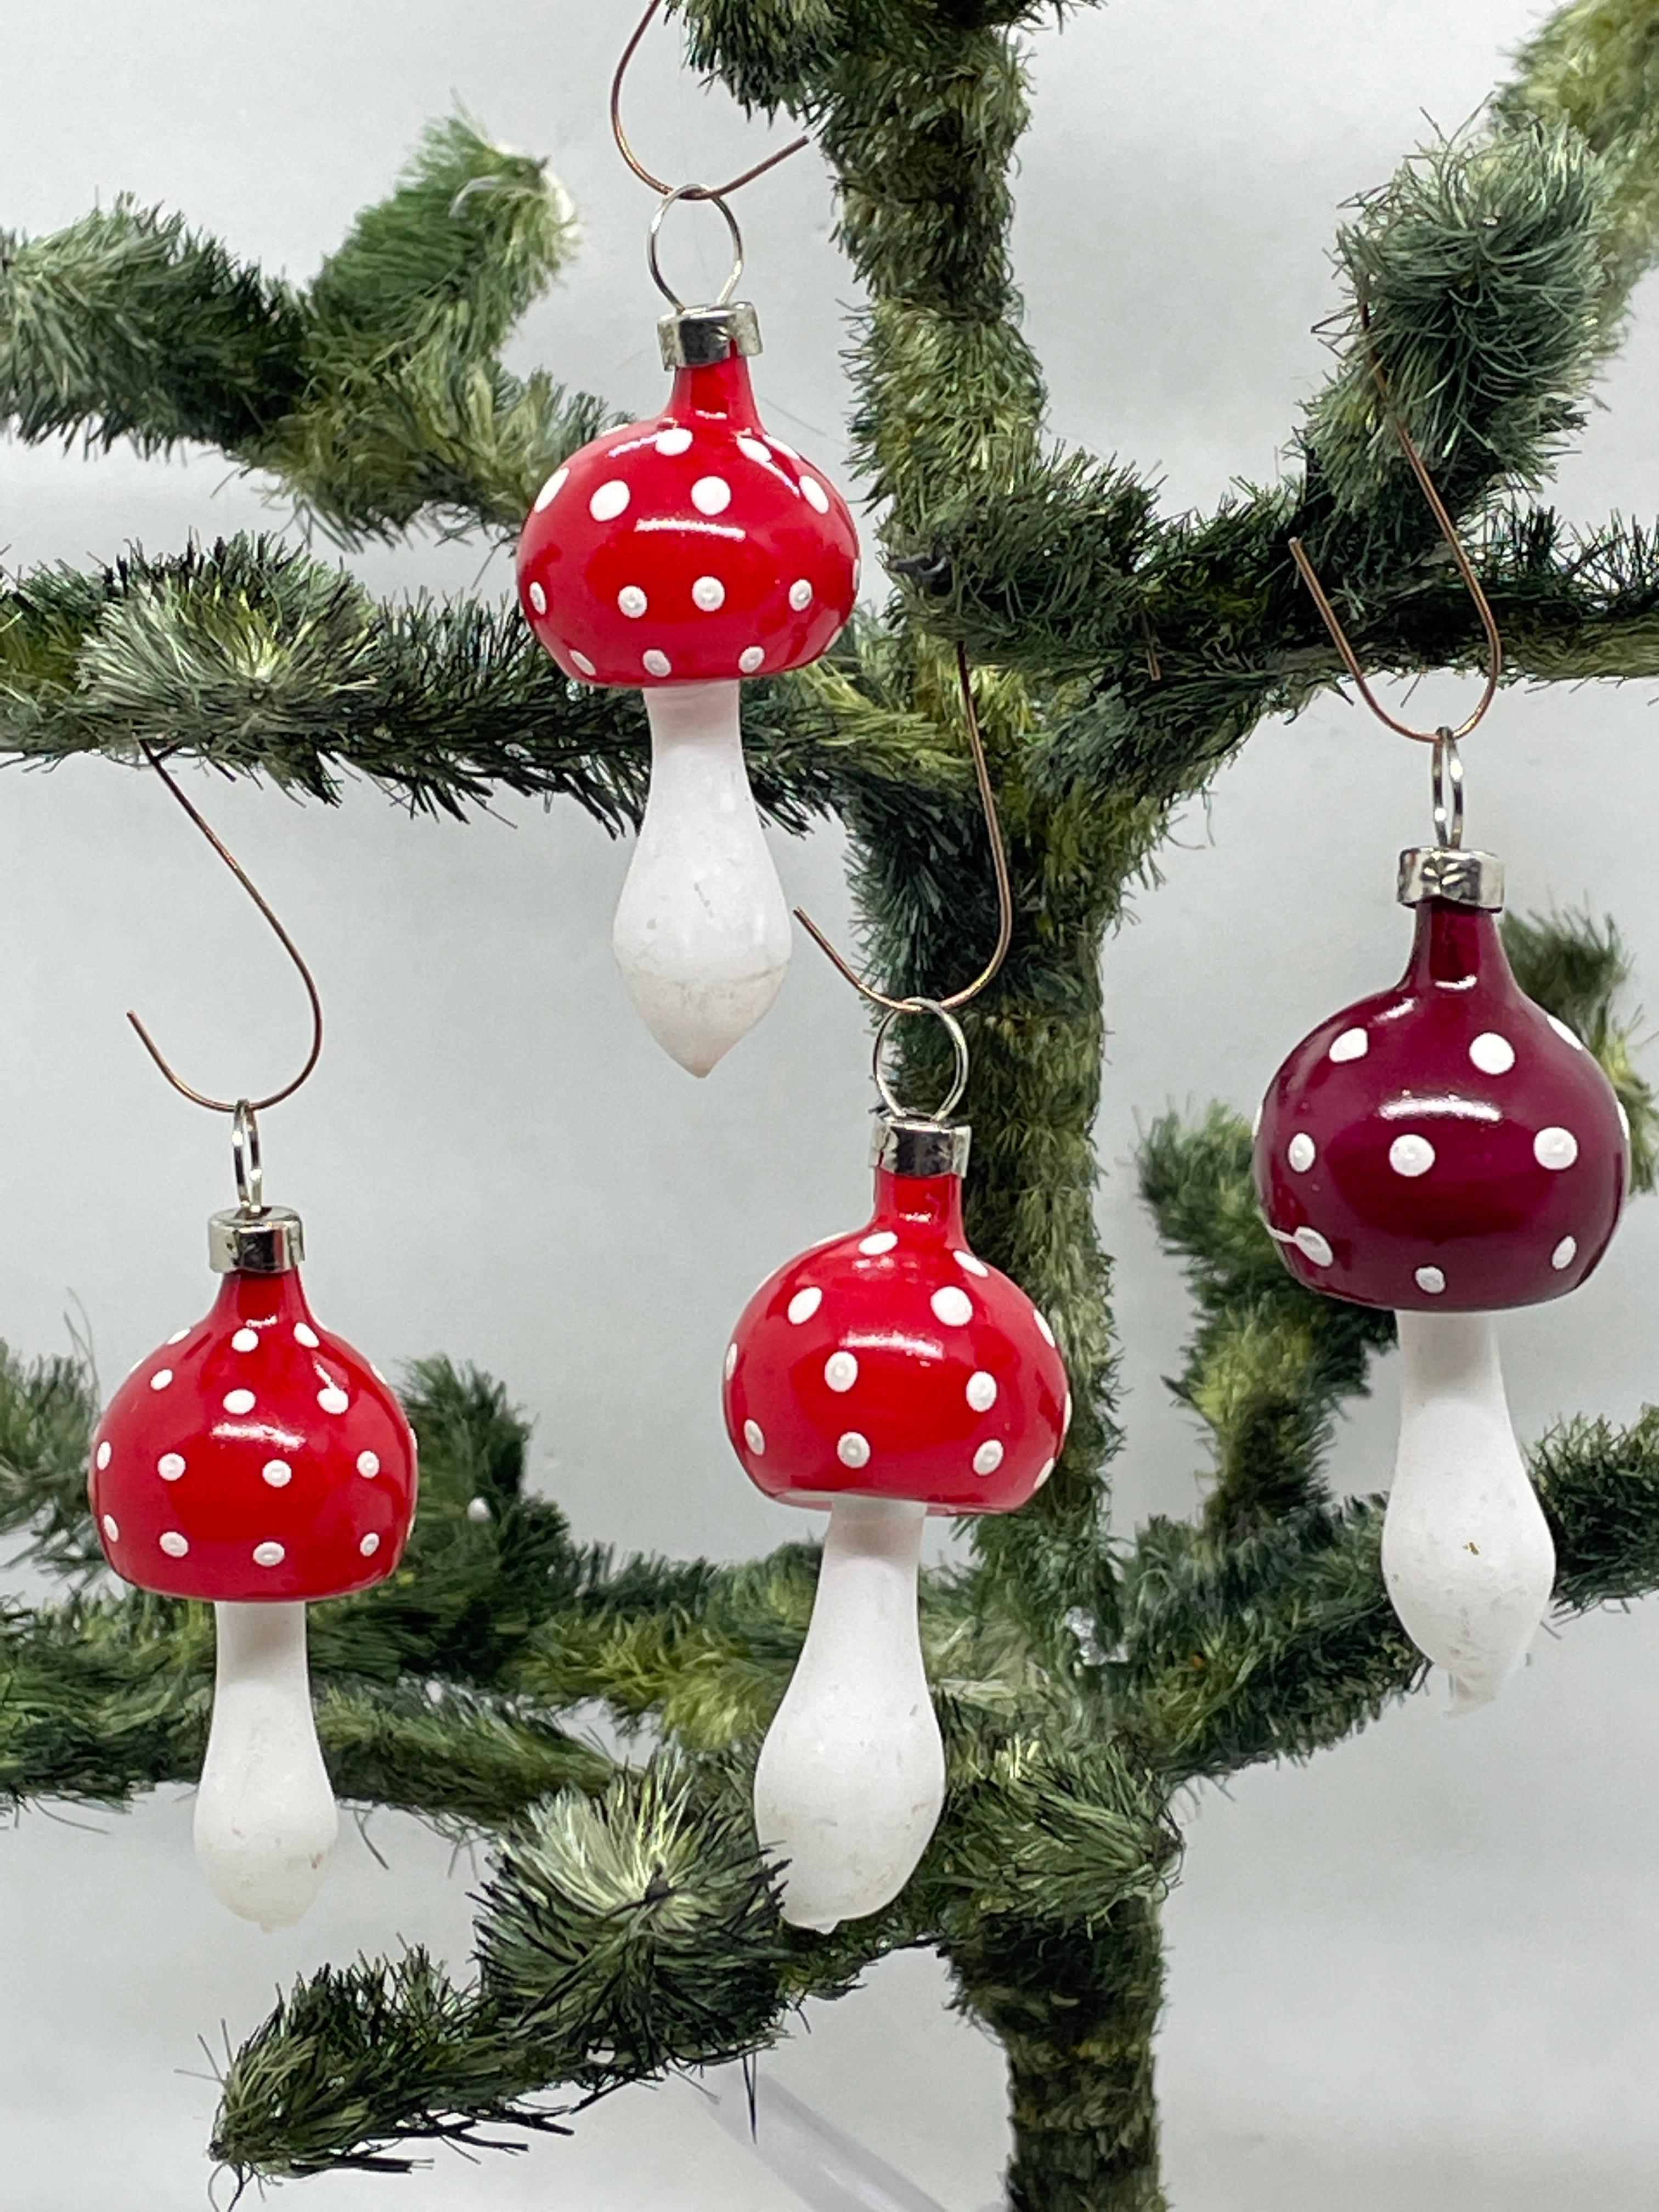 A rare christmas ornament set of four mushrooms. Each is made from thin mouth blown glass, this would be a great antique addition for your christmas or feather tree.
 